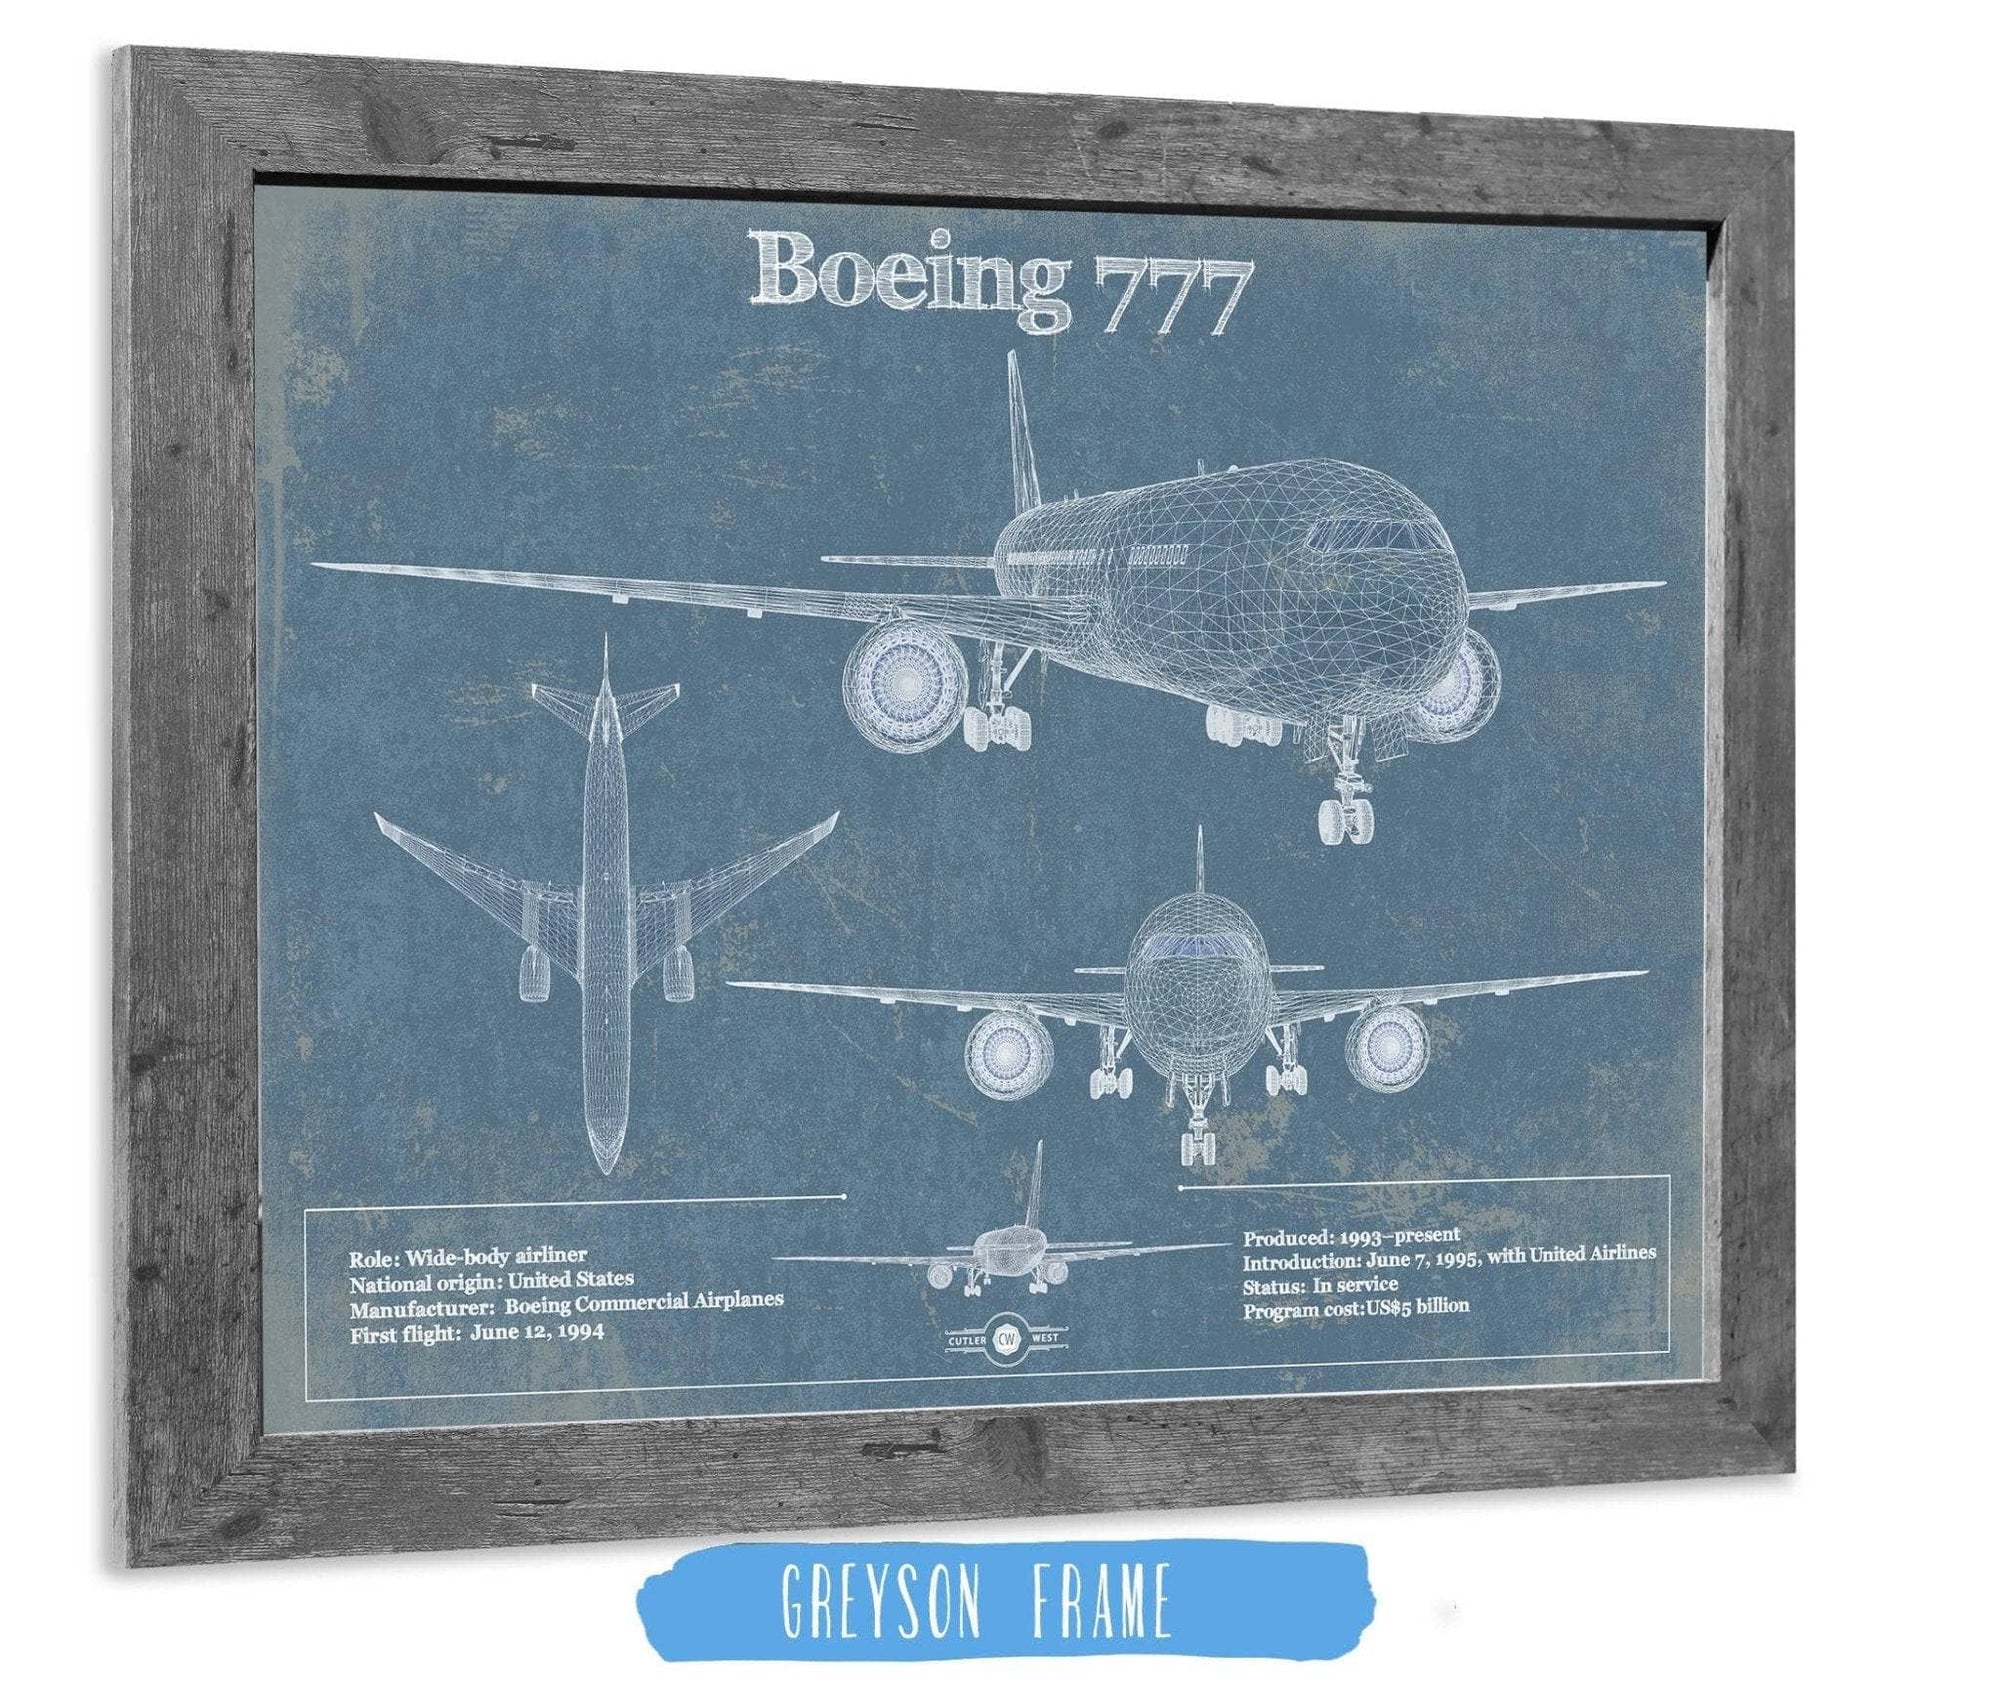 Cutler West Boeing Collection 14" x 11" / Greyson Frame Boeing 777 Vintage Aviation Blueprint Print - Custom Pilot Name Can Be Added 833447921-TOP